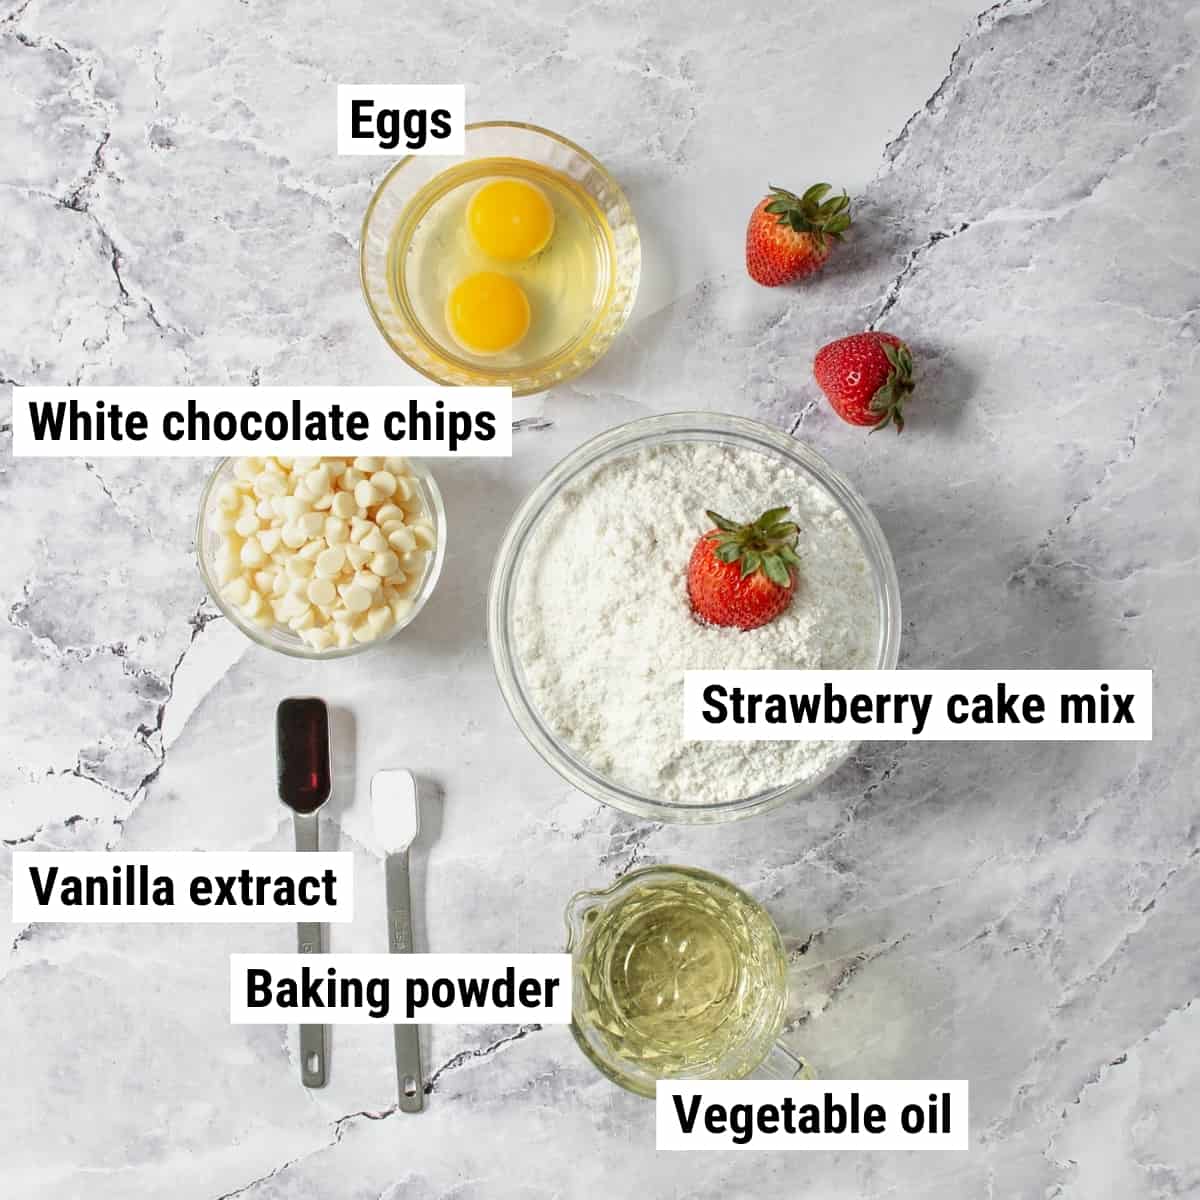 The ingredients to make strawberry cake cookies spread out on a table.